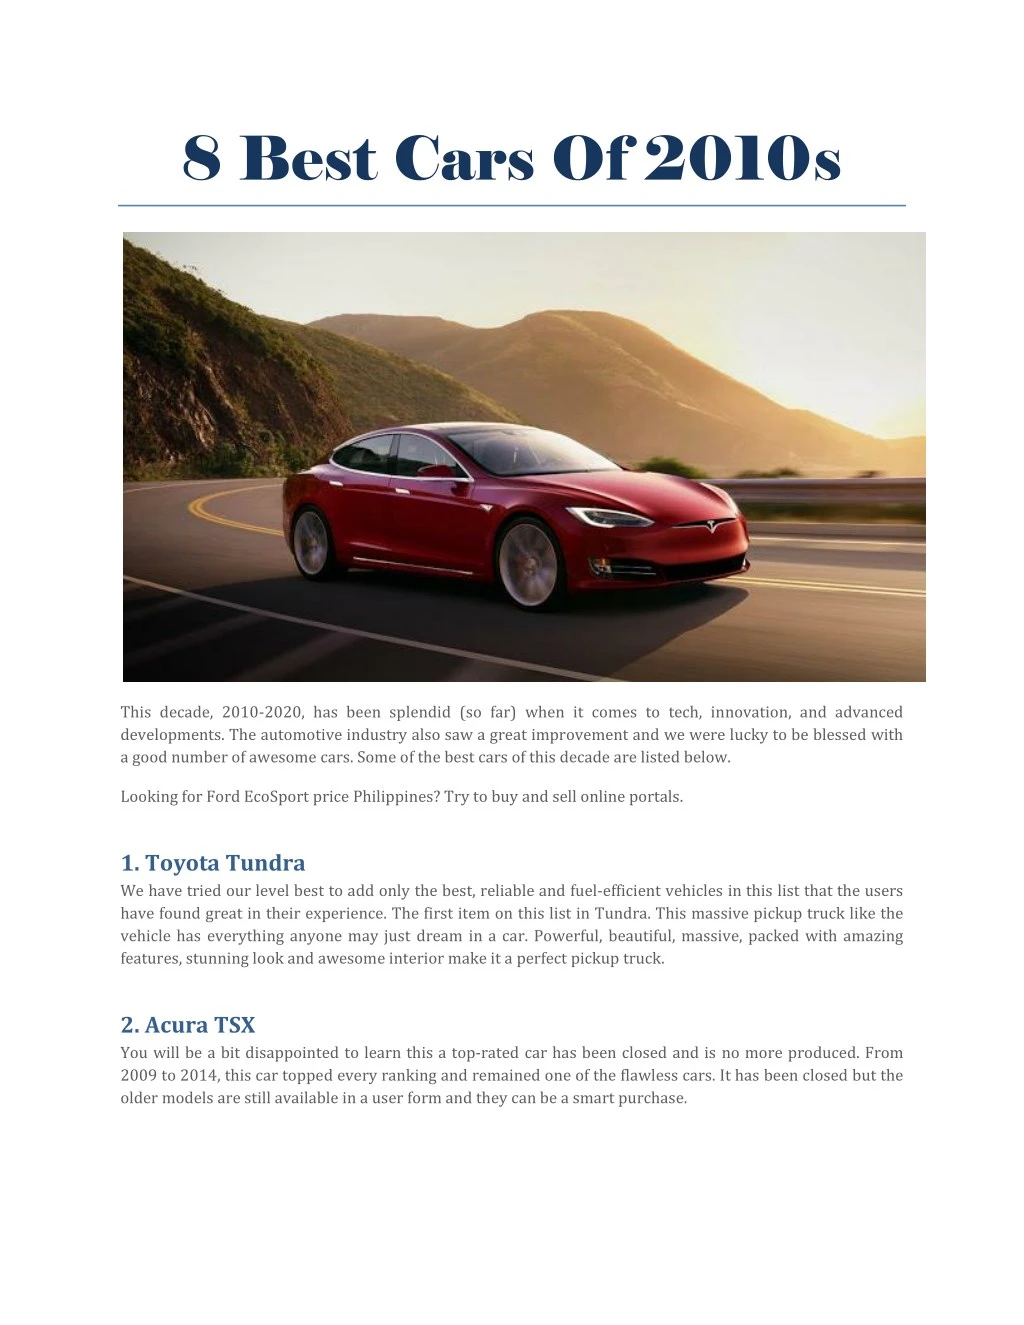 8 best cars of 2010s